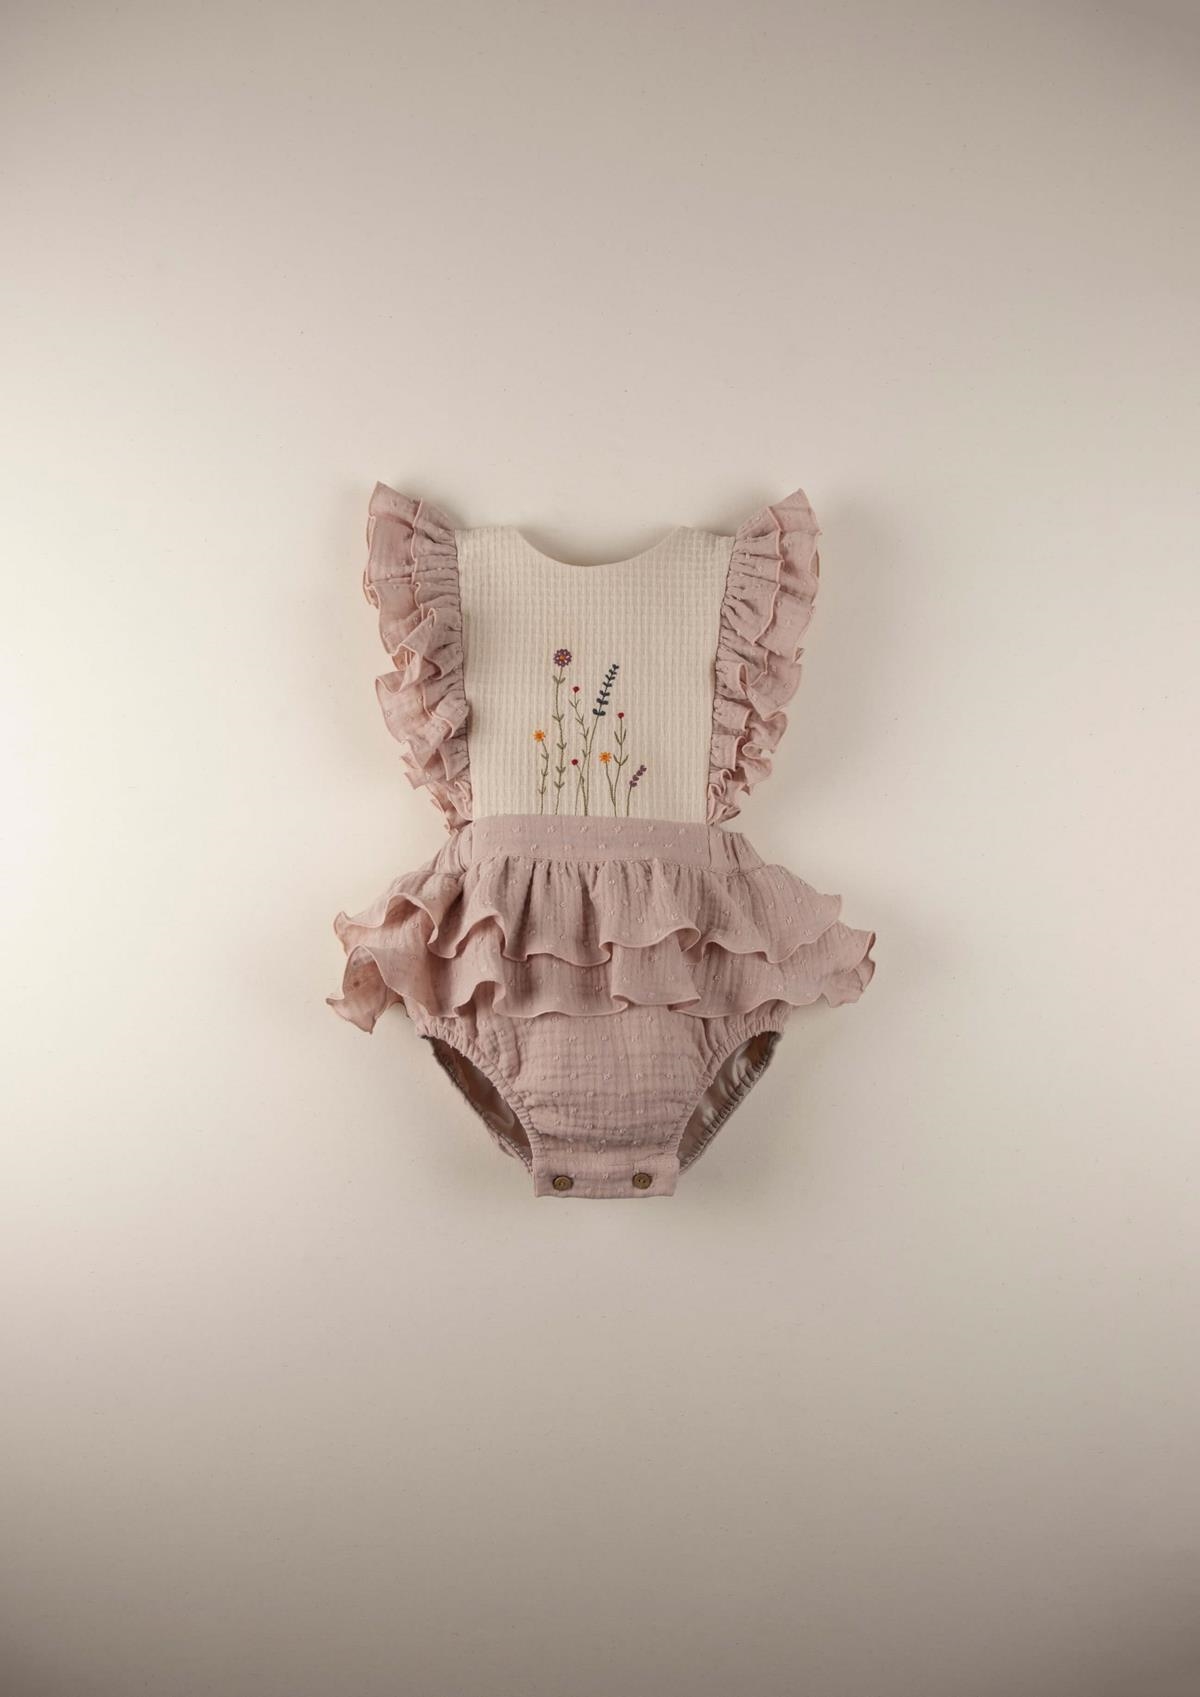 Mod.6.2 Pink romper suit with embroidered bib | SS22 Mod.6.2 Pink romper suit with embroidered bib | 1